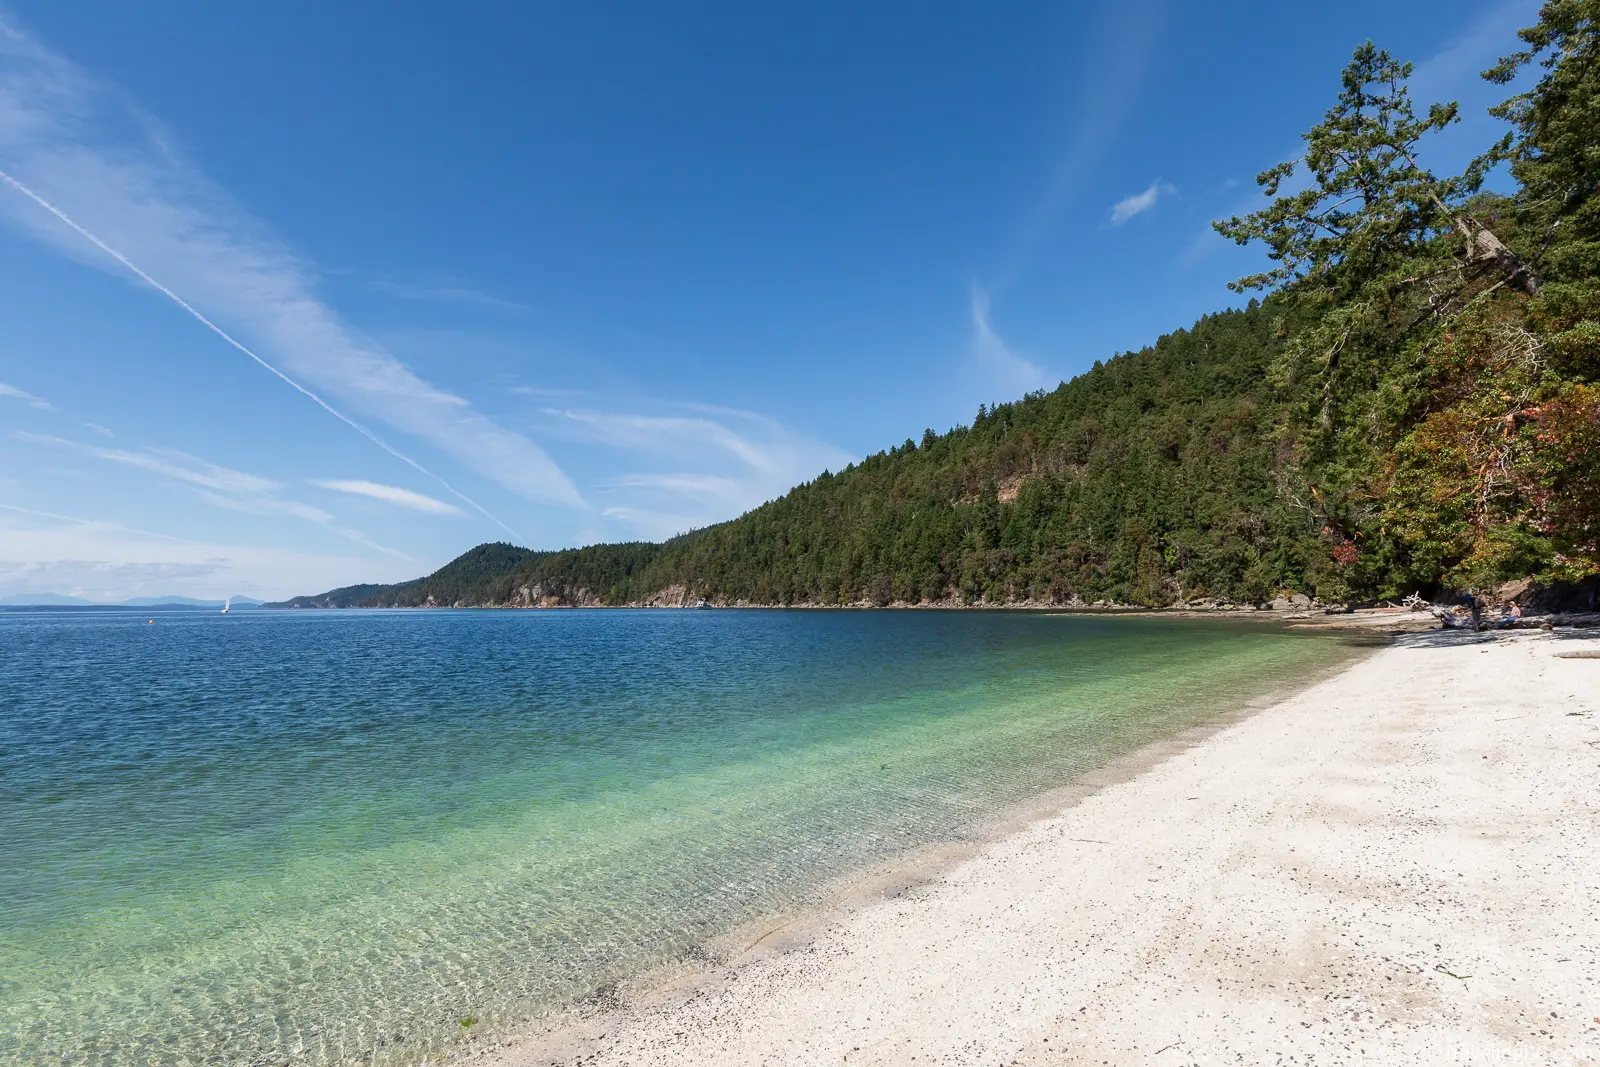 If you're deciding where to stay on Galiano Island, the campground at Montague Harbour Marine Provincial Park is a great option